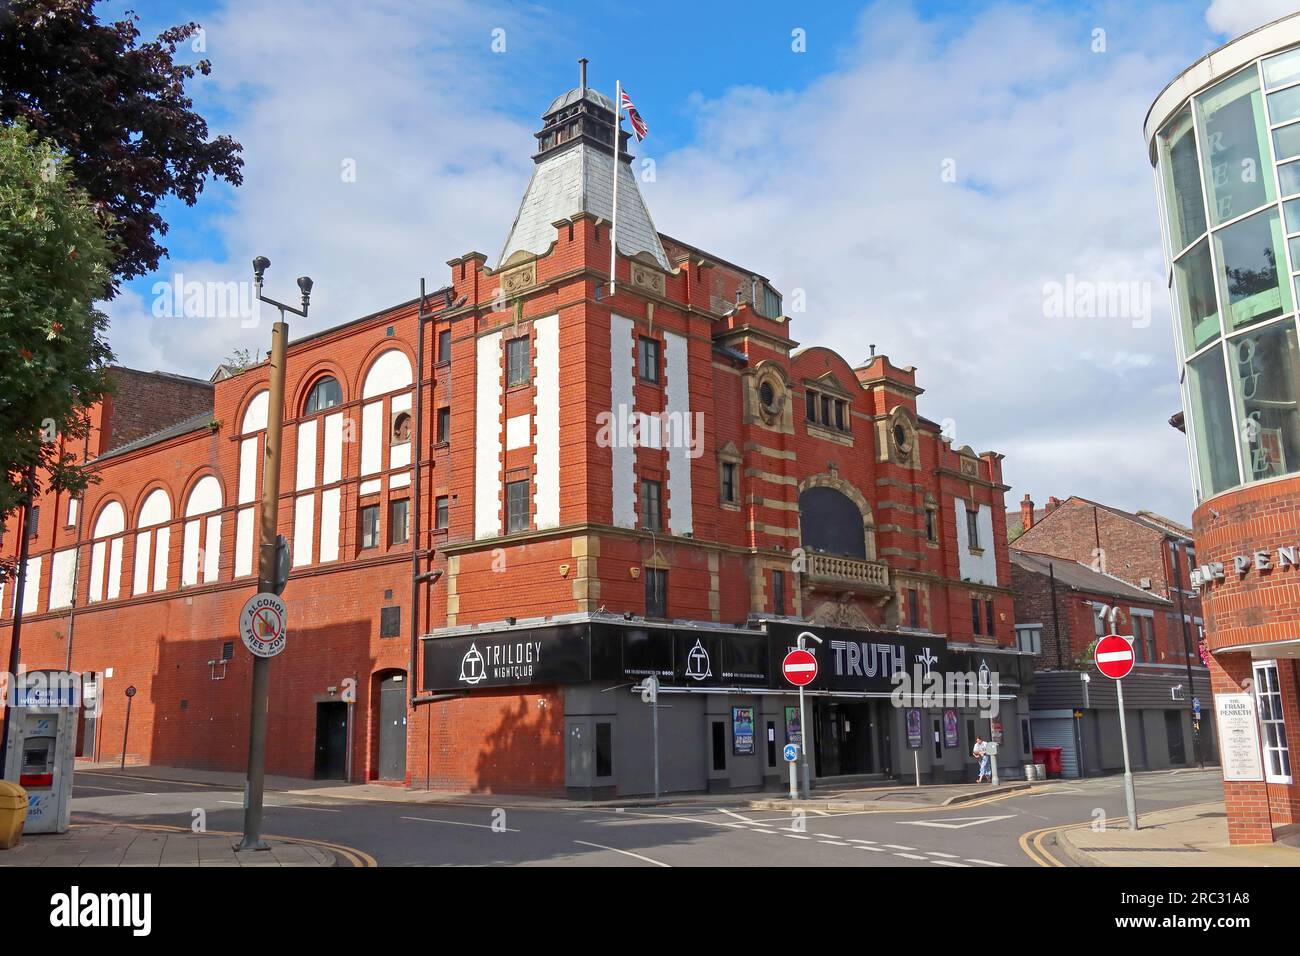 The original Palace Hippodrome Theatre, 15-17 Friars Gate, Warrington town centre, Cheshire, England, WA1 2RR, now Truth / Trilogy Stock Photo